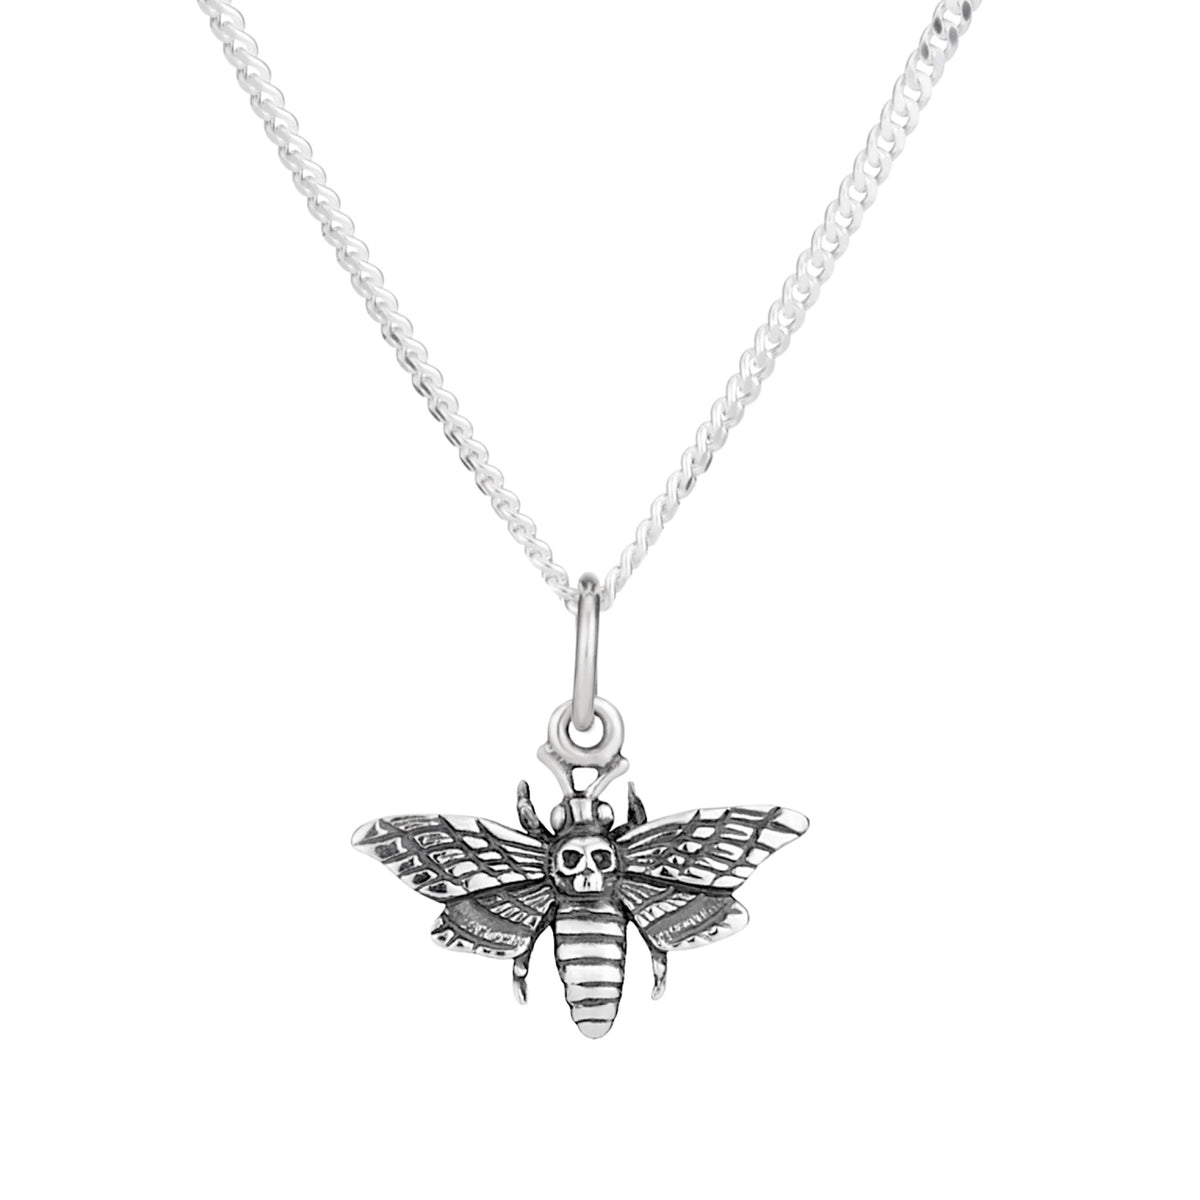 MISERY MOTH - Sterling Silver Necklace